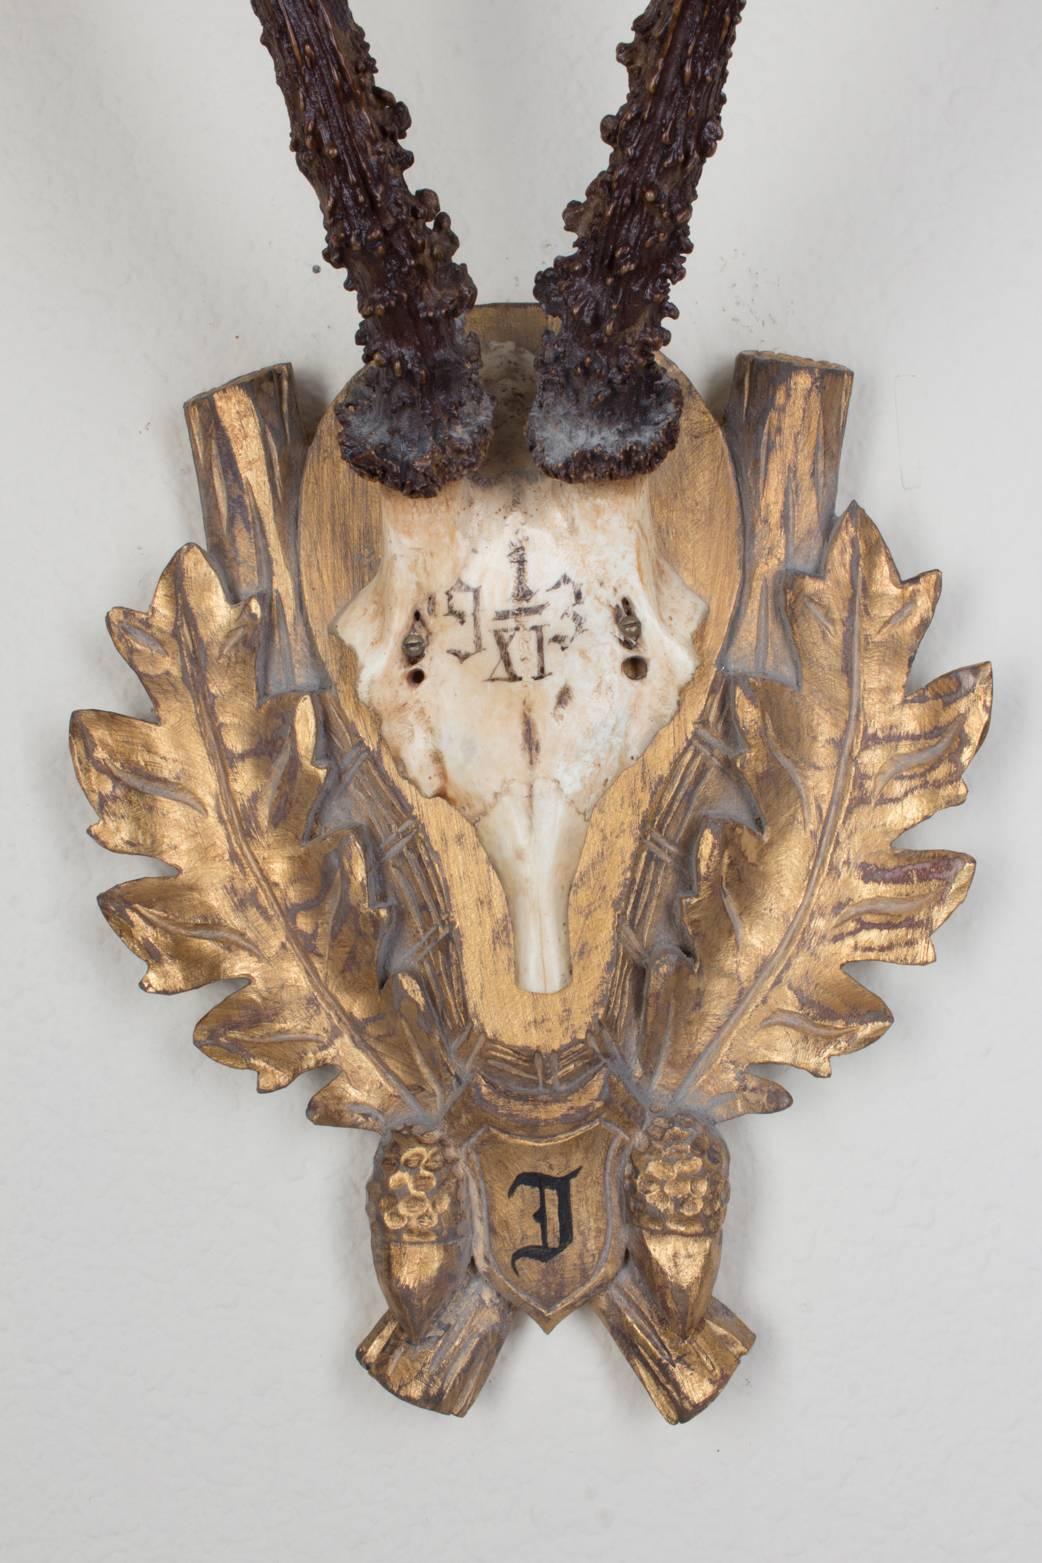 19th century Roe Deer trophy believed to have been taken by Emperor Franz Josef during his time at the Kaiservilla, the summer palace of the great Austro-Hungarian monarchy in the small village of Bad Ischl, Austria. Original plaque and initial